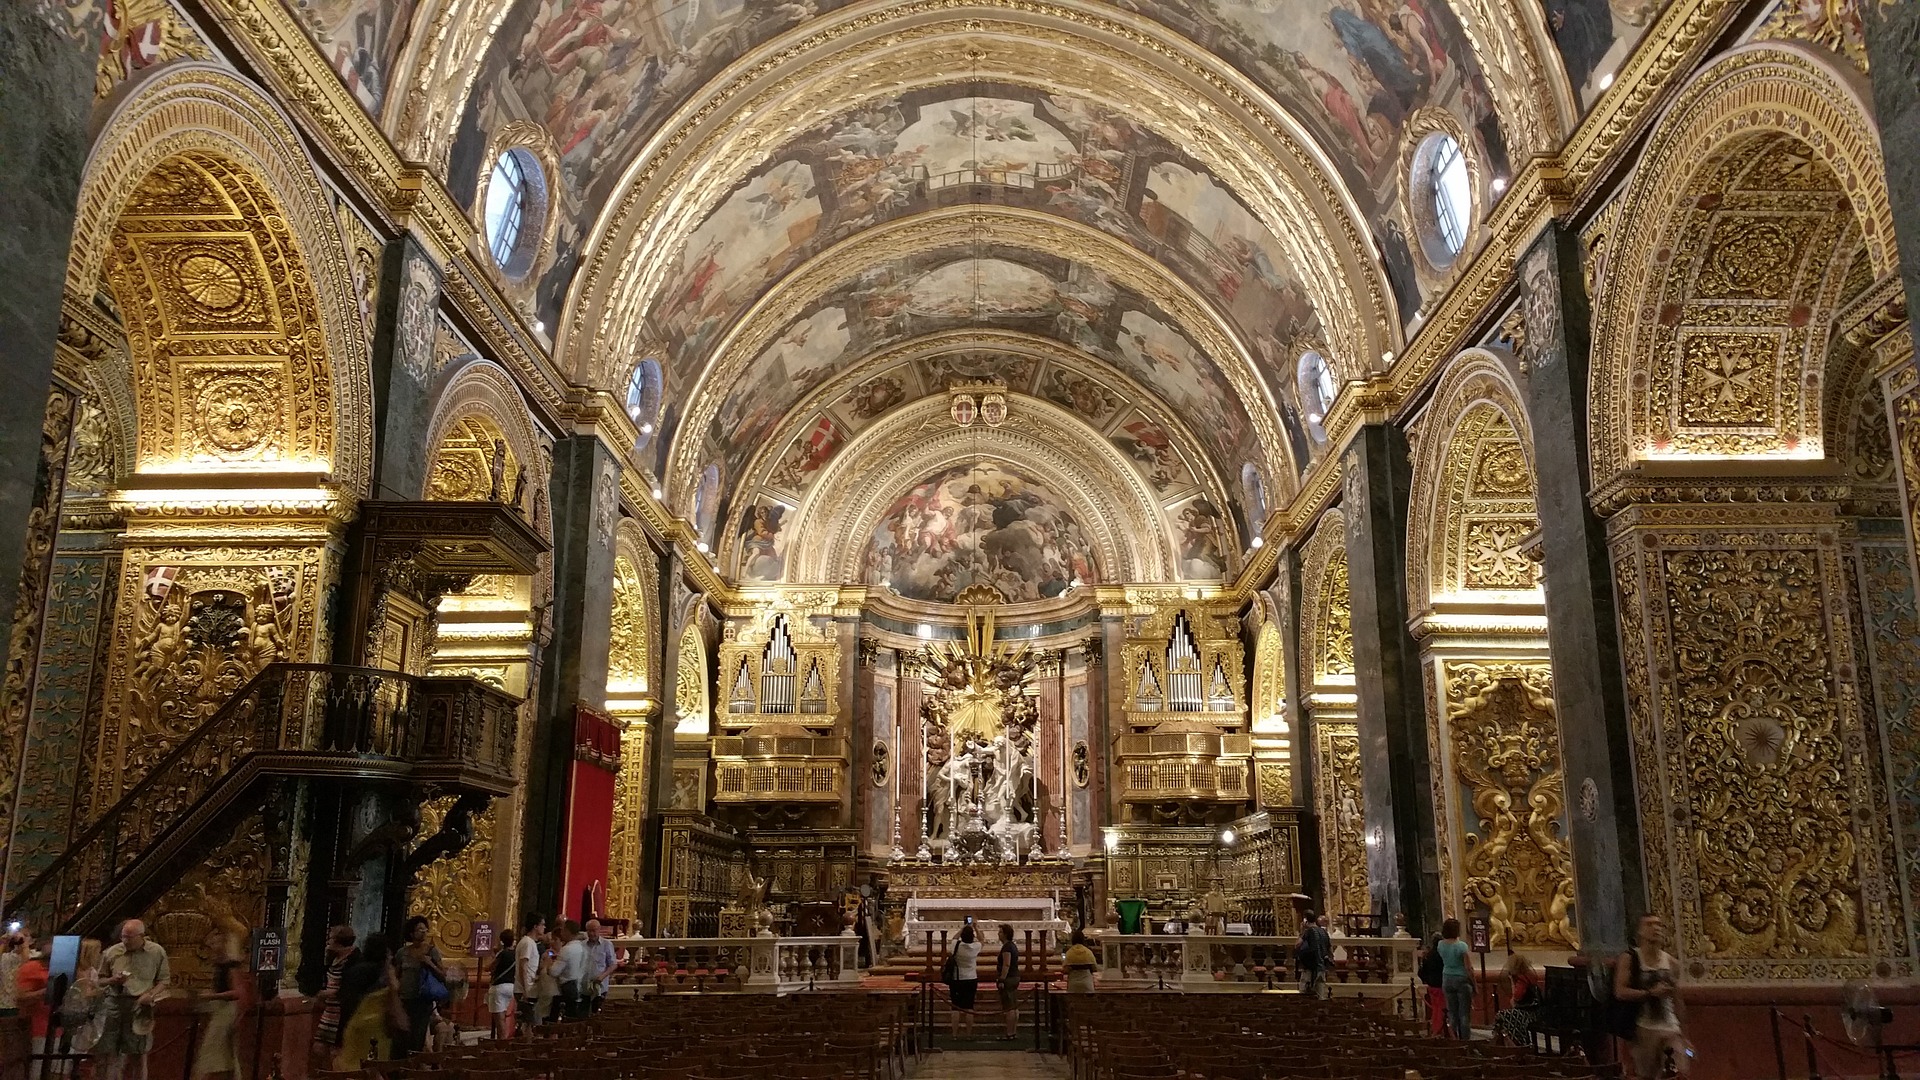 Inside The Co-Cathedral of St. John’s